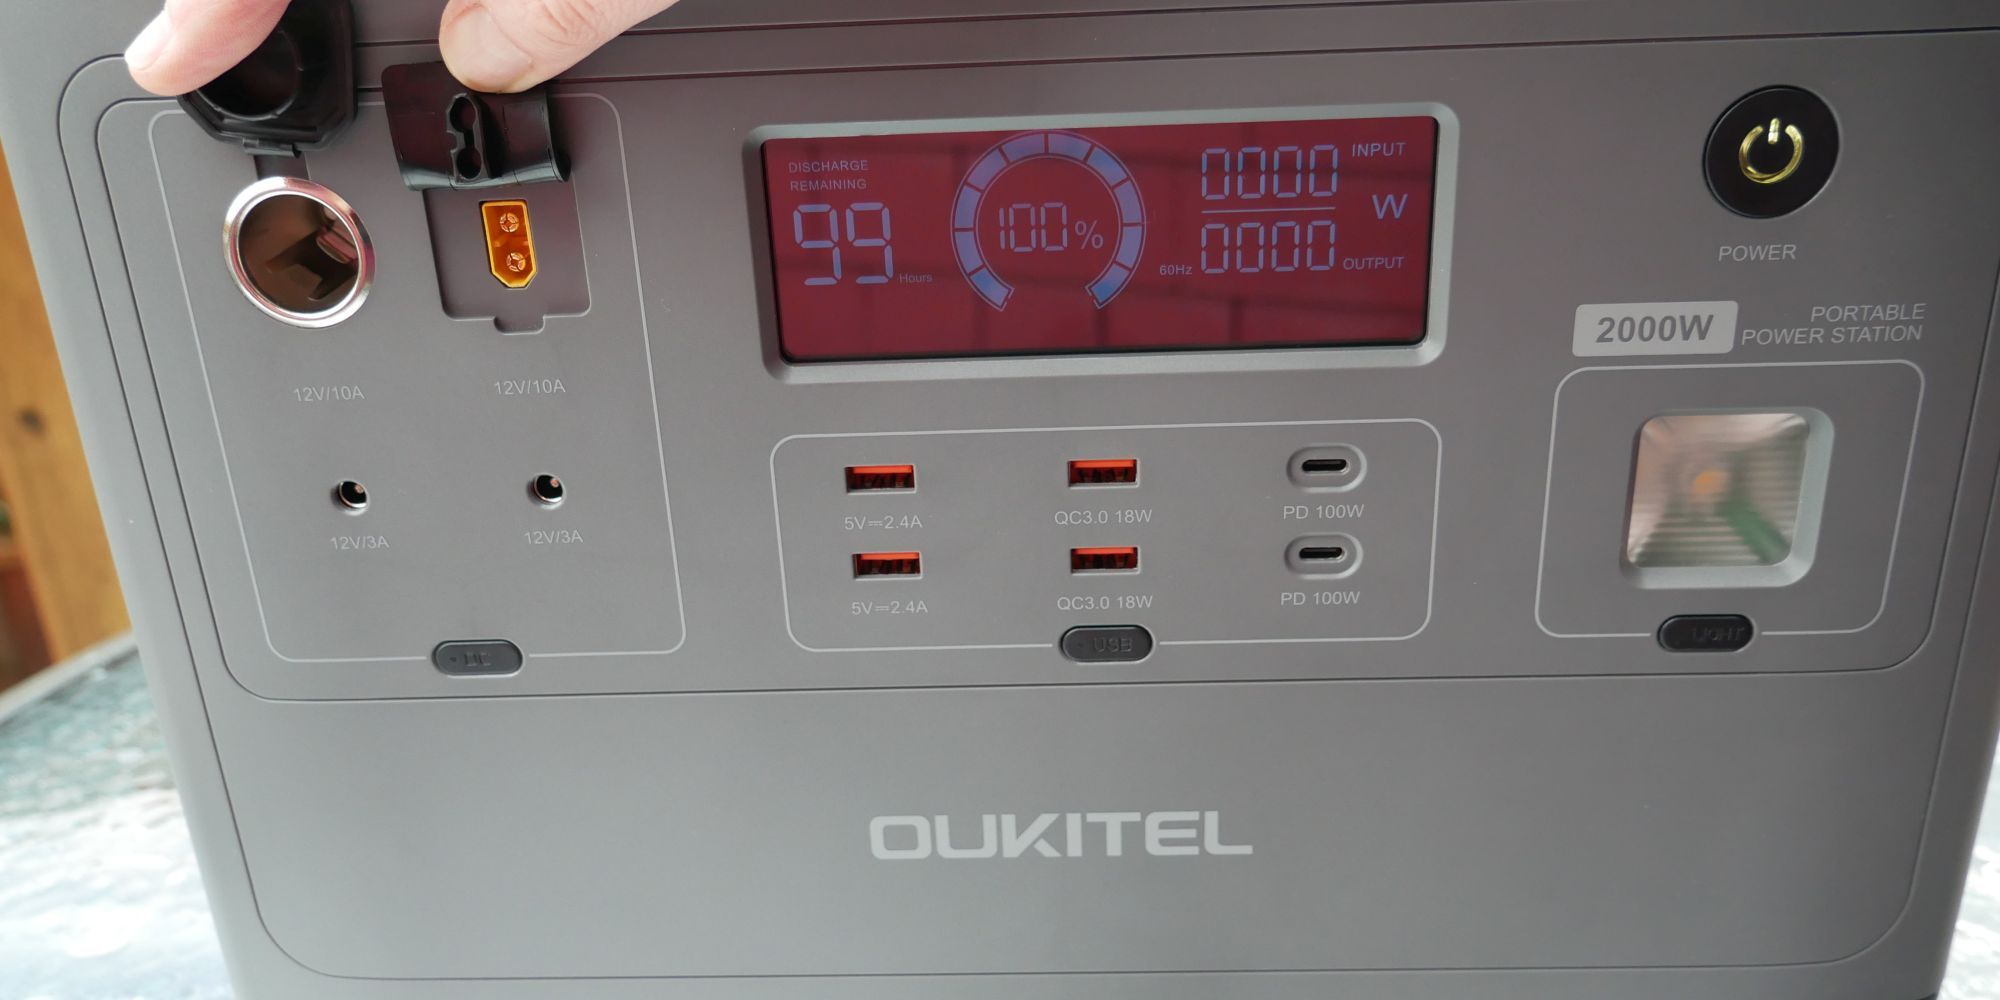 Oukitel P2001 front side with all output ports and LED display